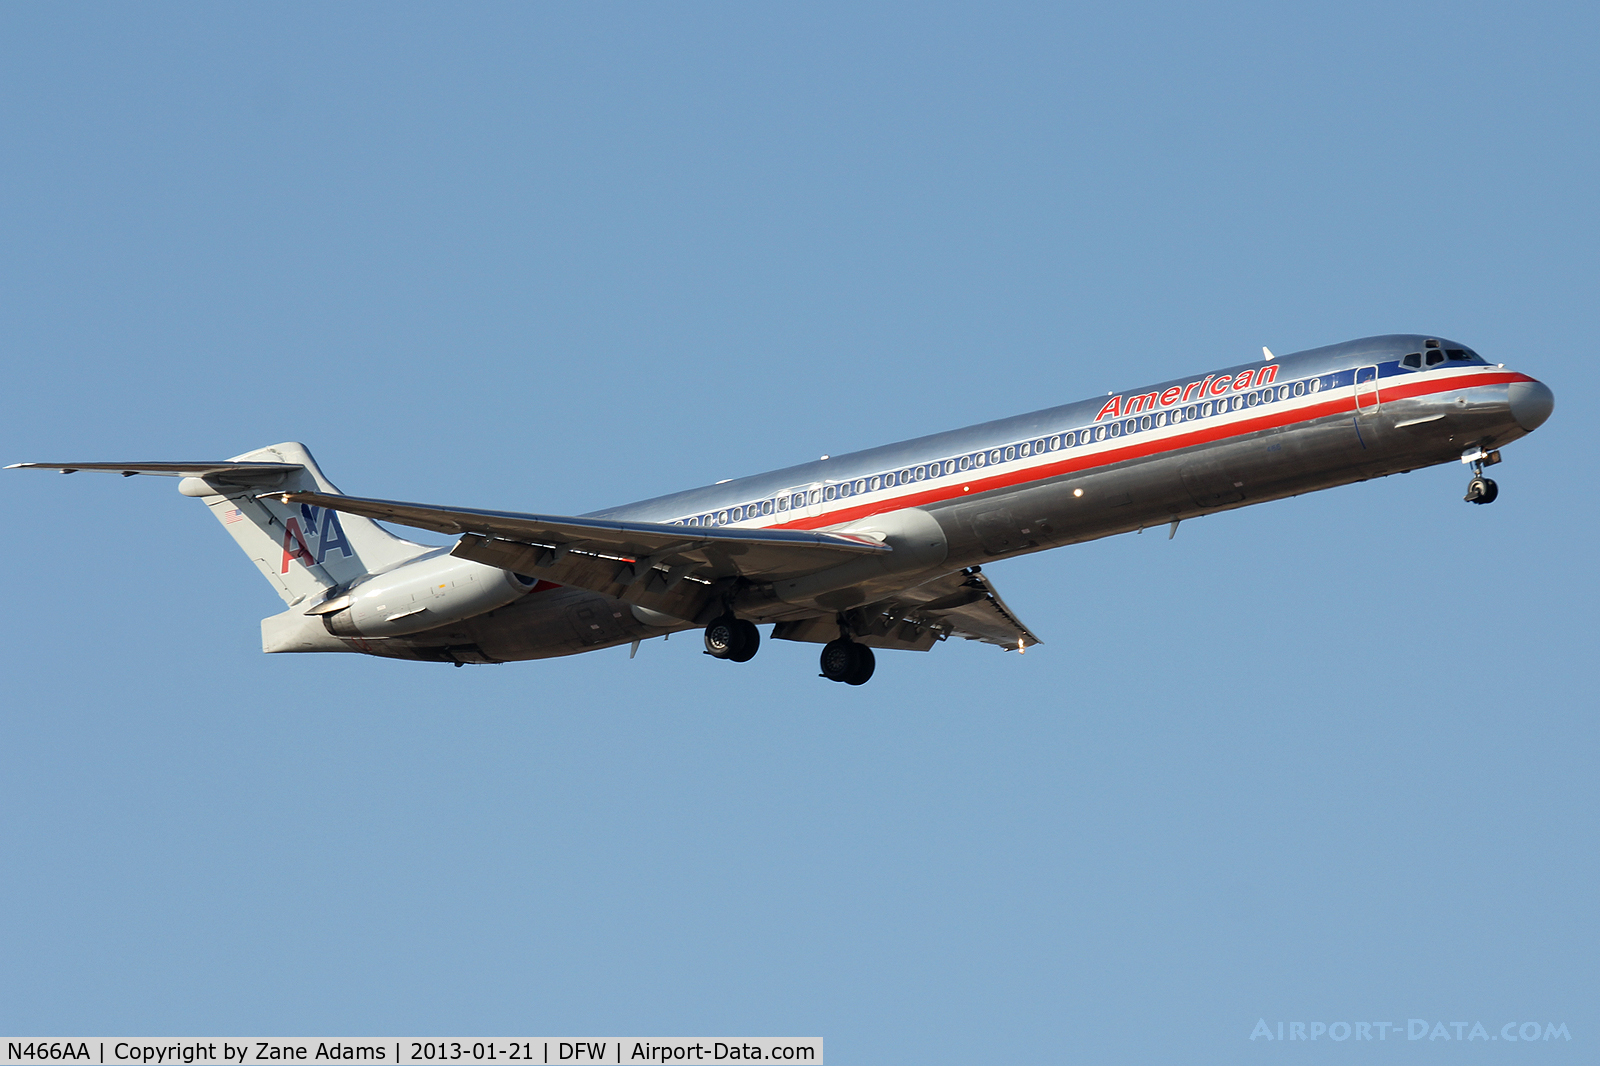 N466AA, 1988 McDonnell Douglas MD-82 (DC-9-82) C/N 49596, American Airlines landing at DFW Airport